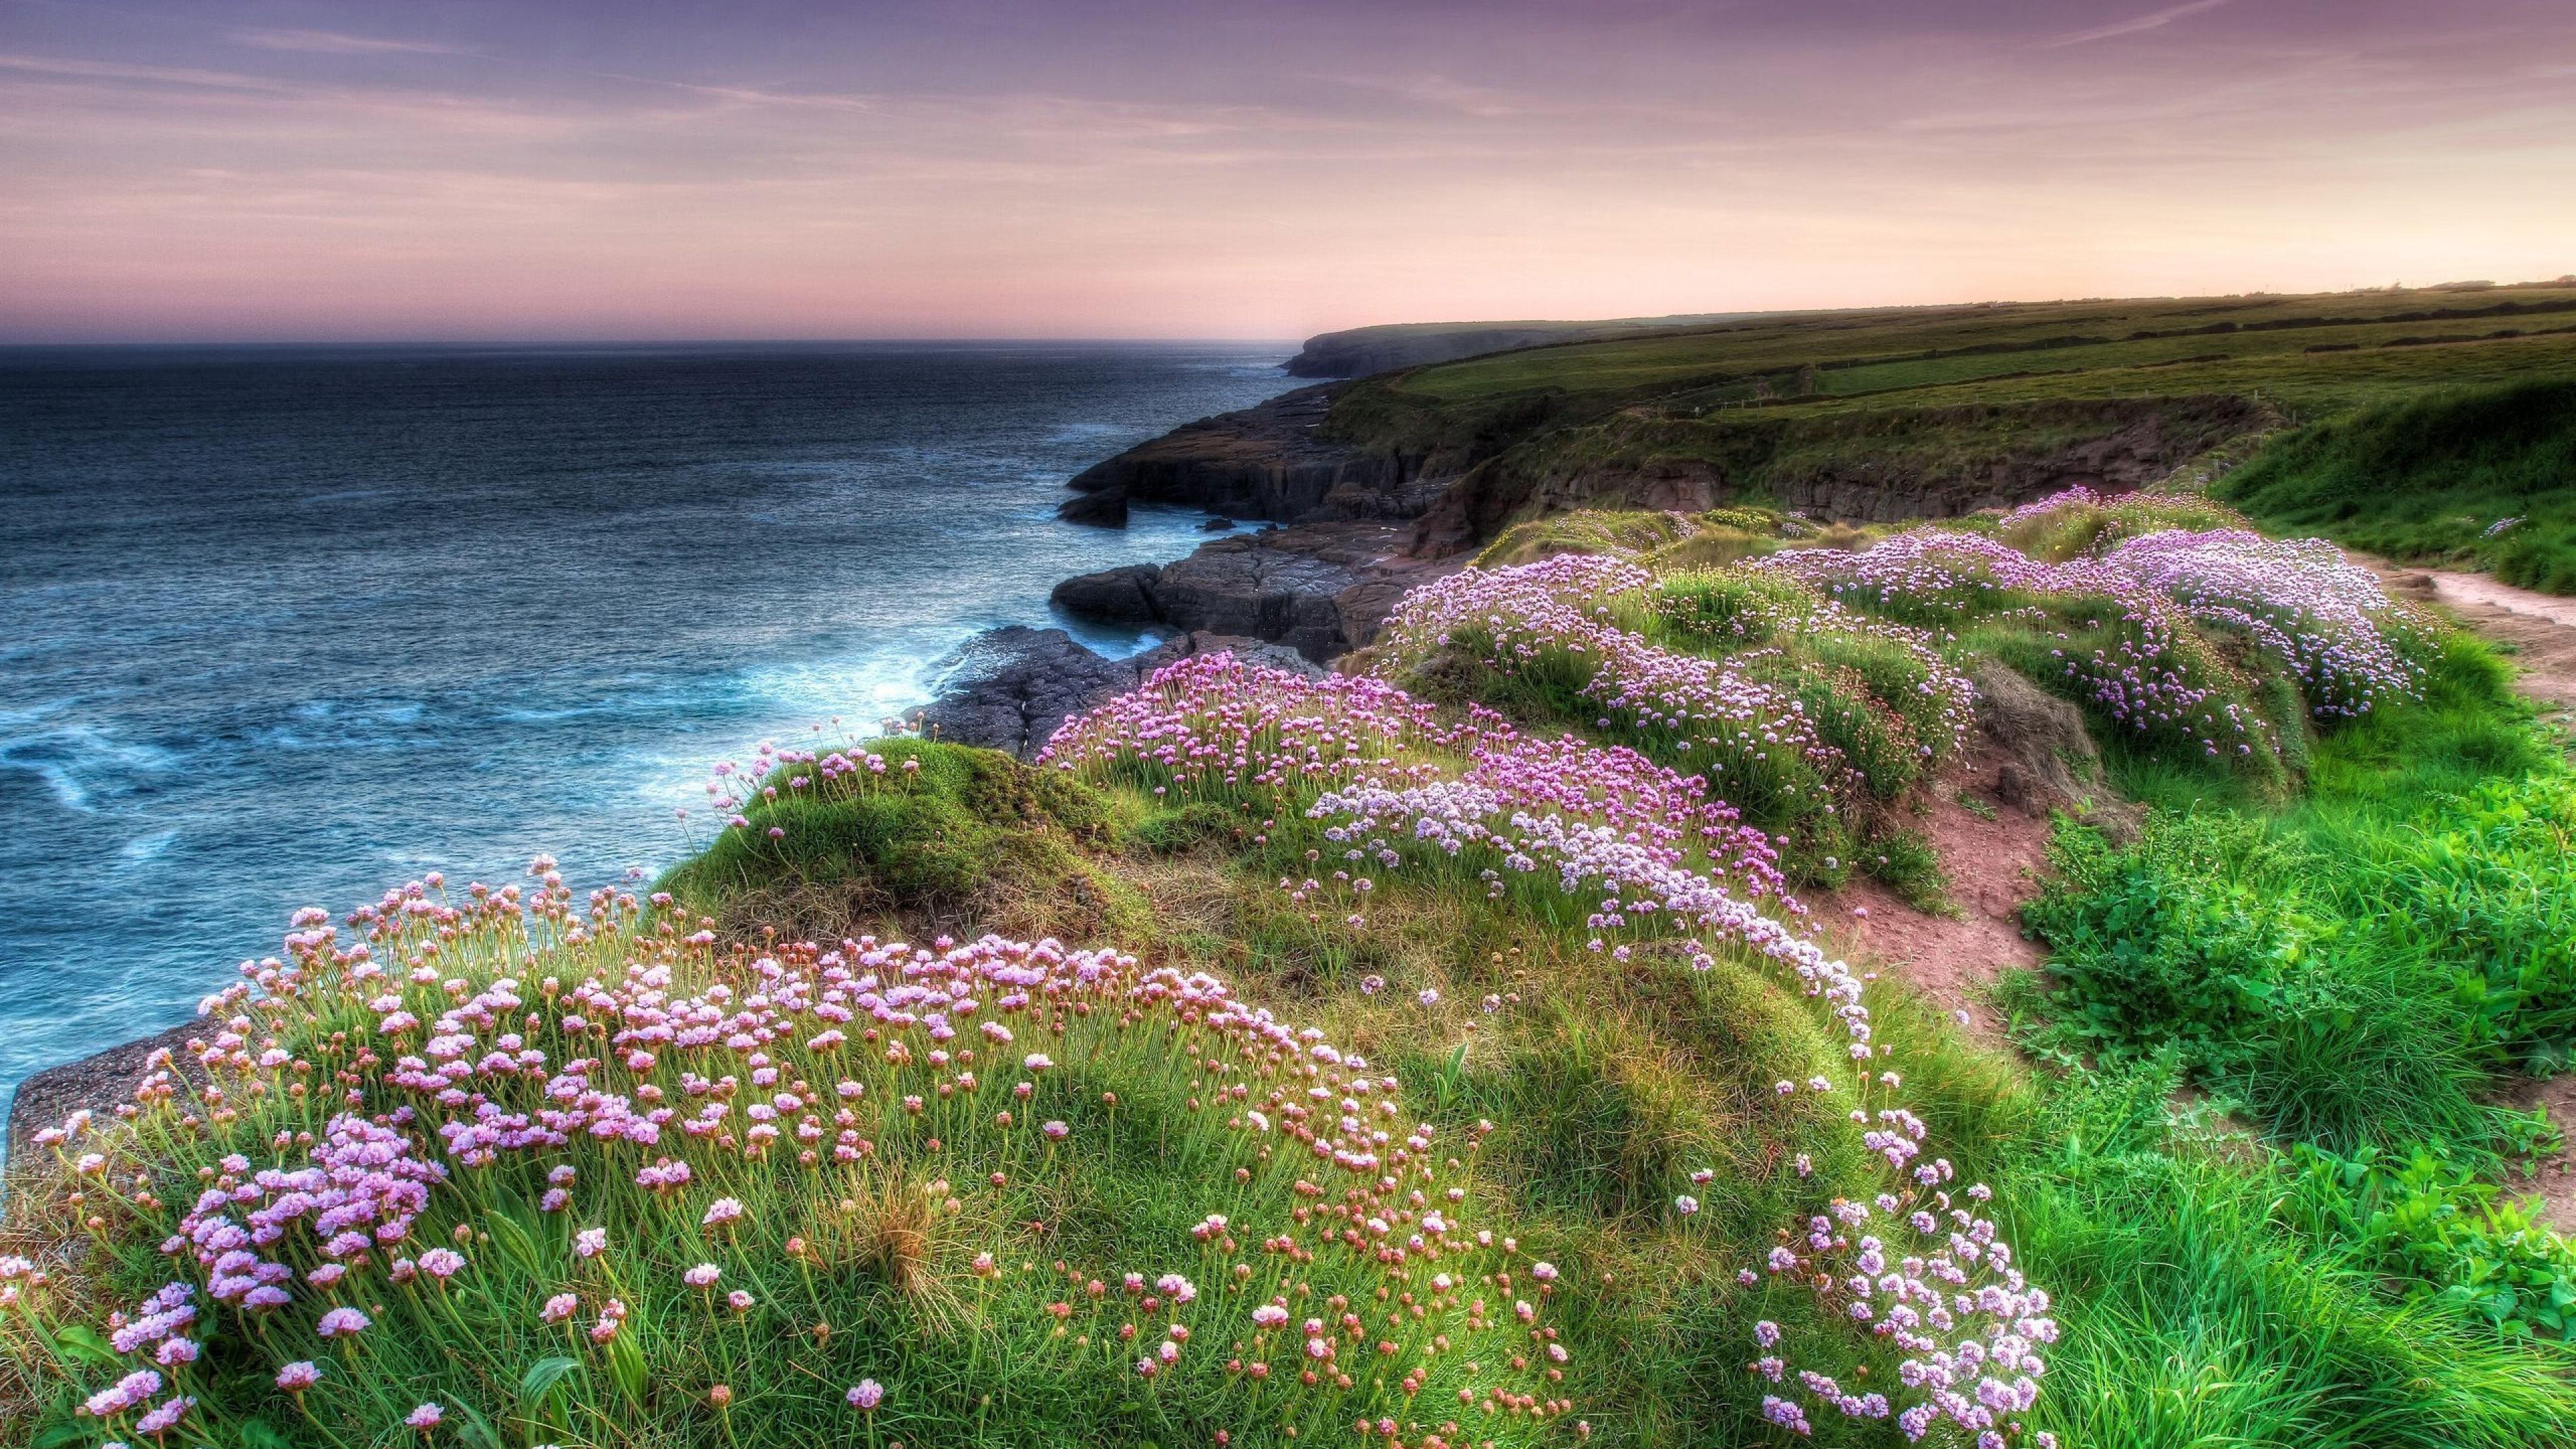 3840x2160 ... Wallpaper | Download for Free; Stunning Ireland Backgrounds